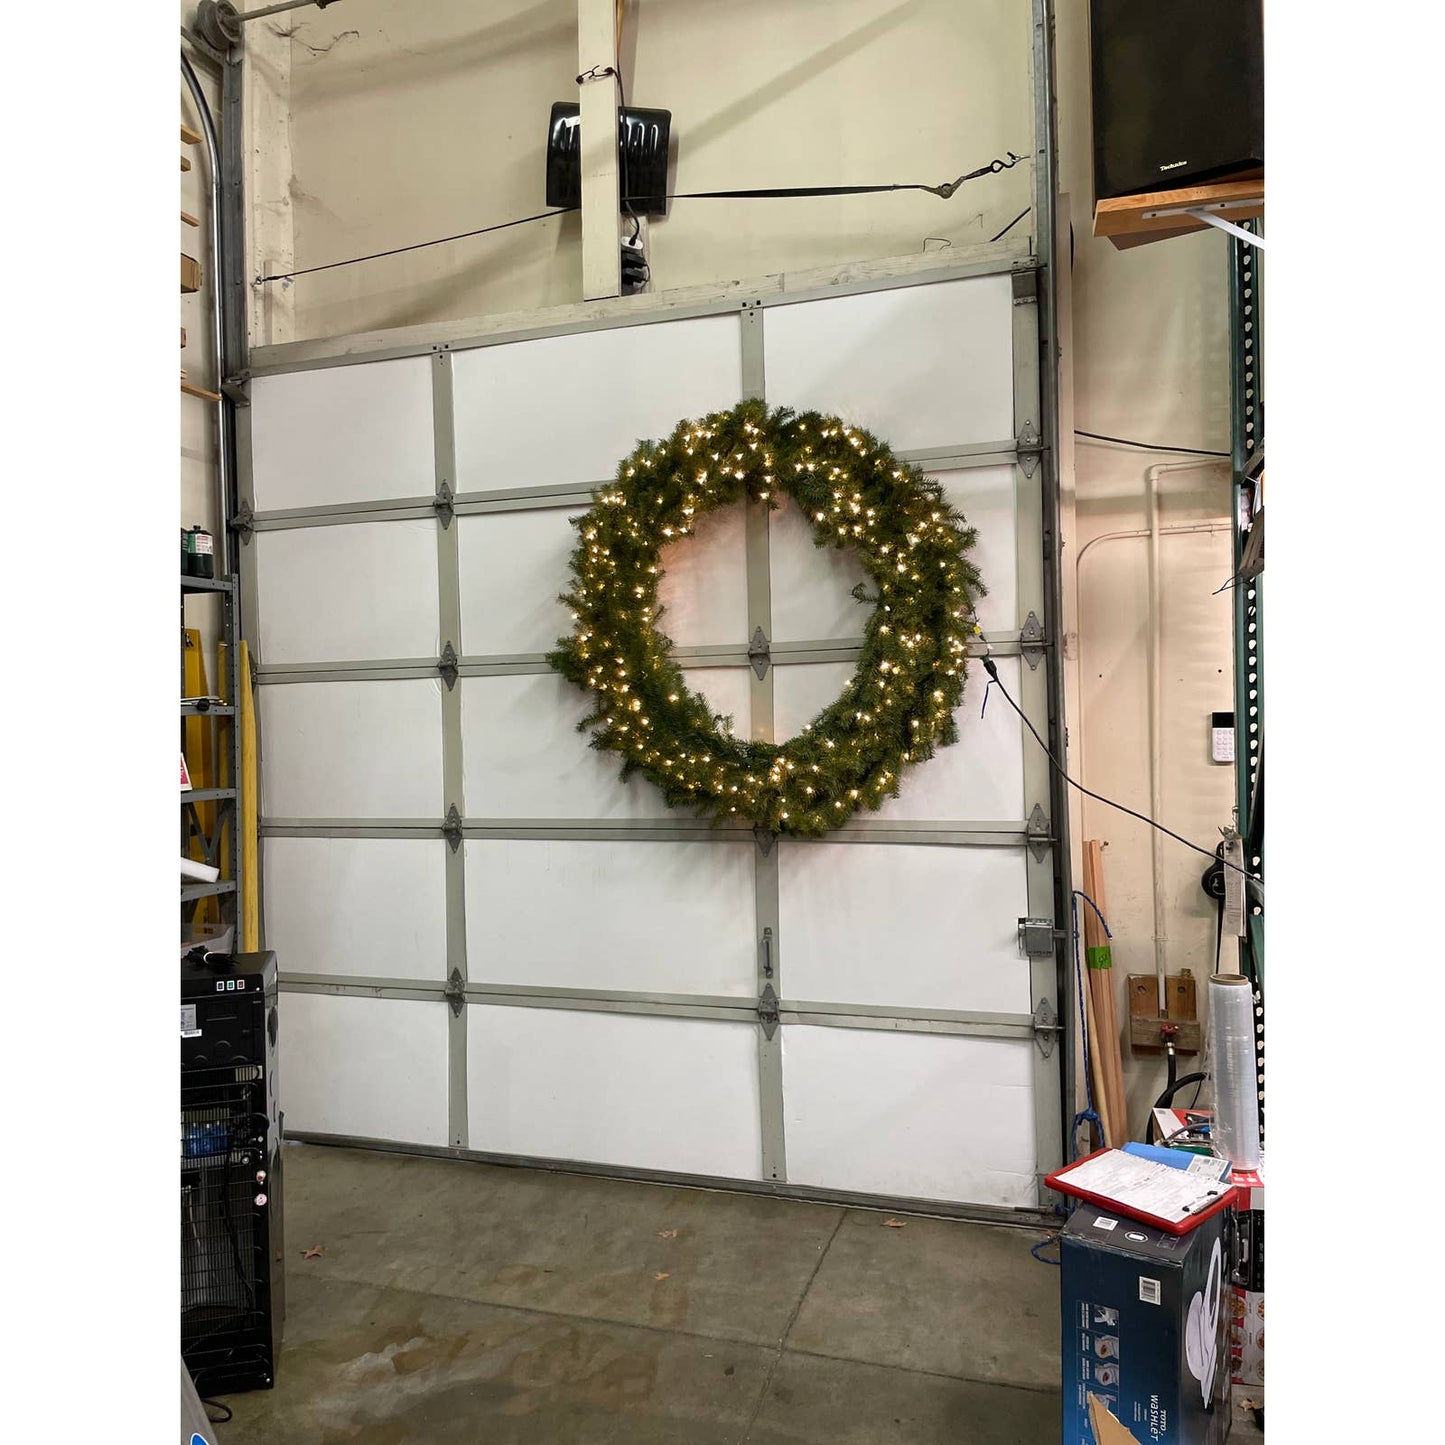 NEW - National Tree Company, Pre-Lit Artificial Christmas Wreath, 60" - Retail $279